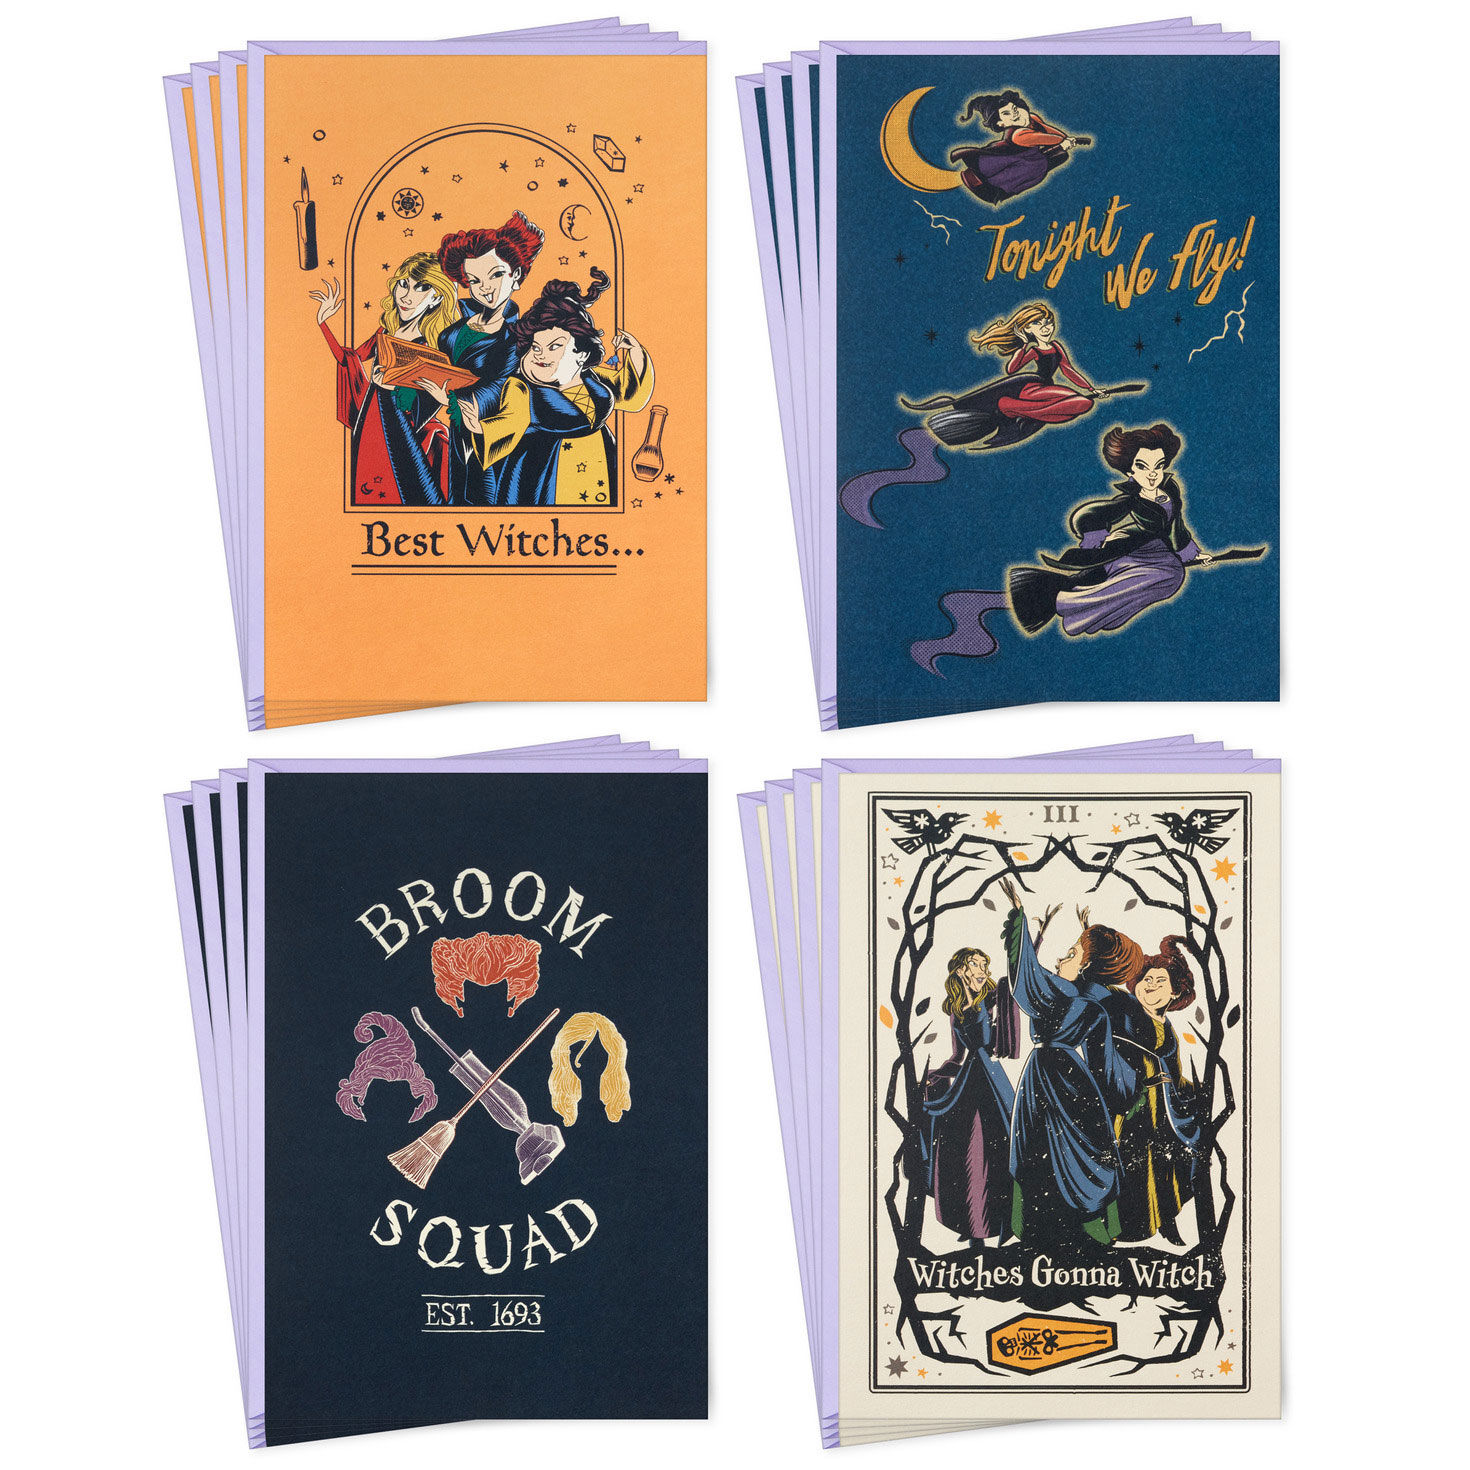 Disney Hocus Pocus Sanderson Sisters Boxed Halloween Cards Assortment, Pack of 16 for only USD 9.99 | Hallmark